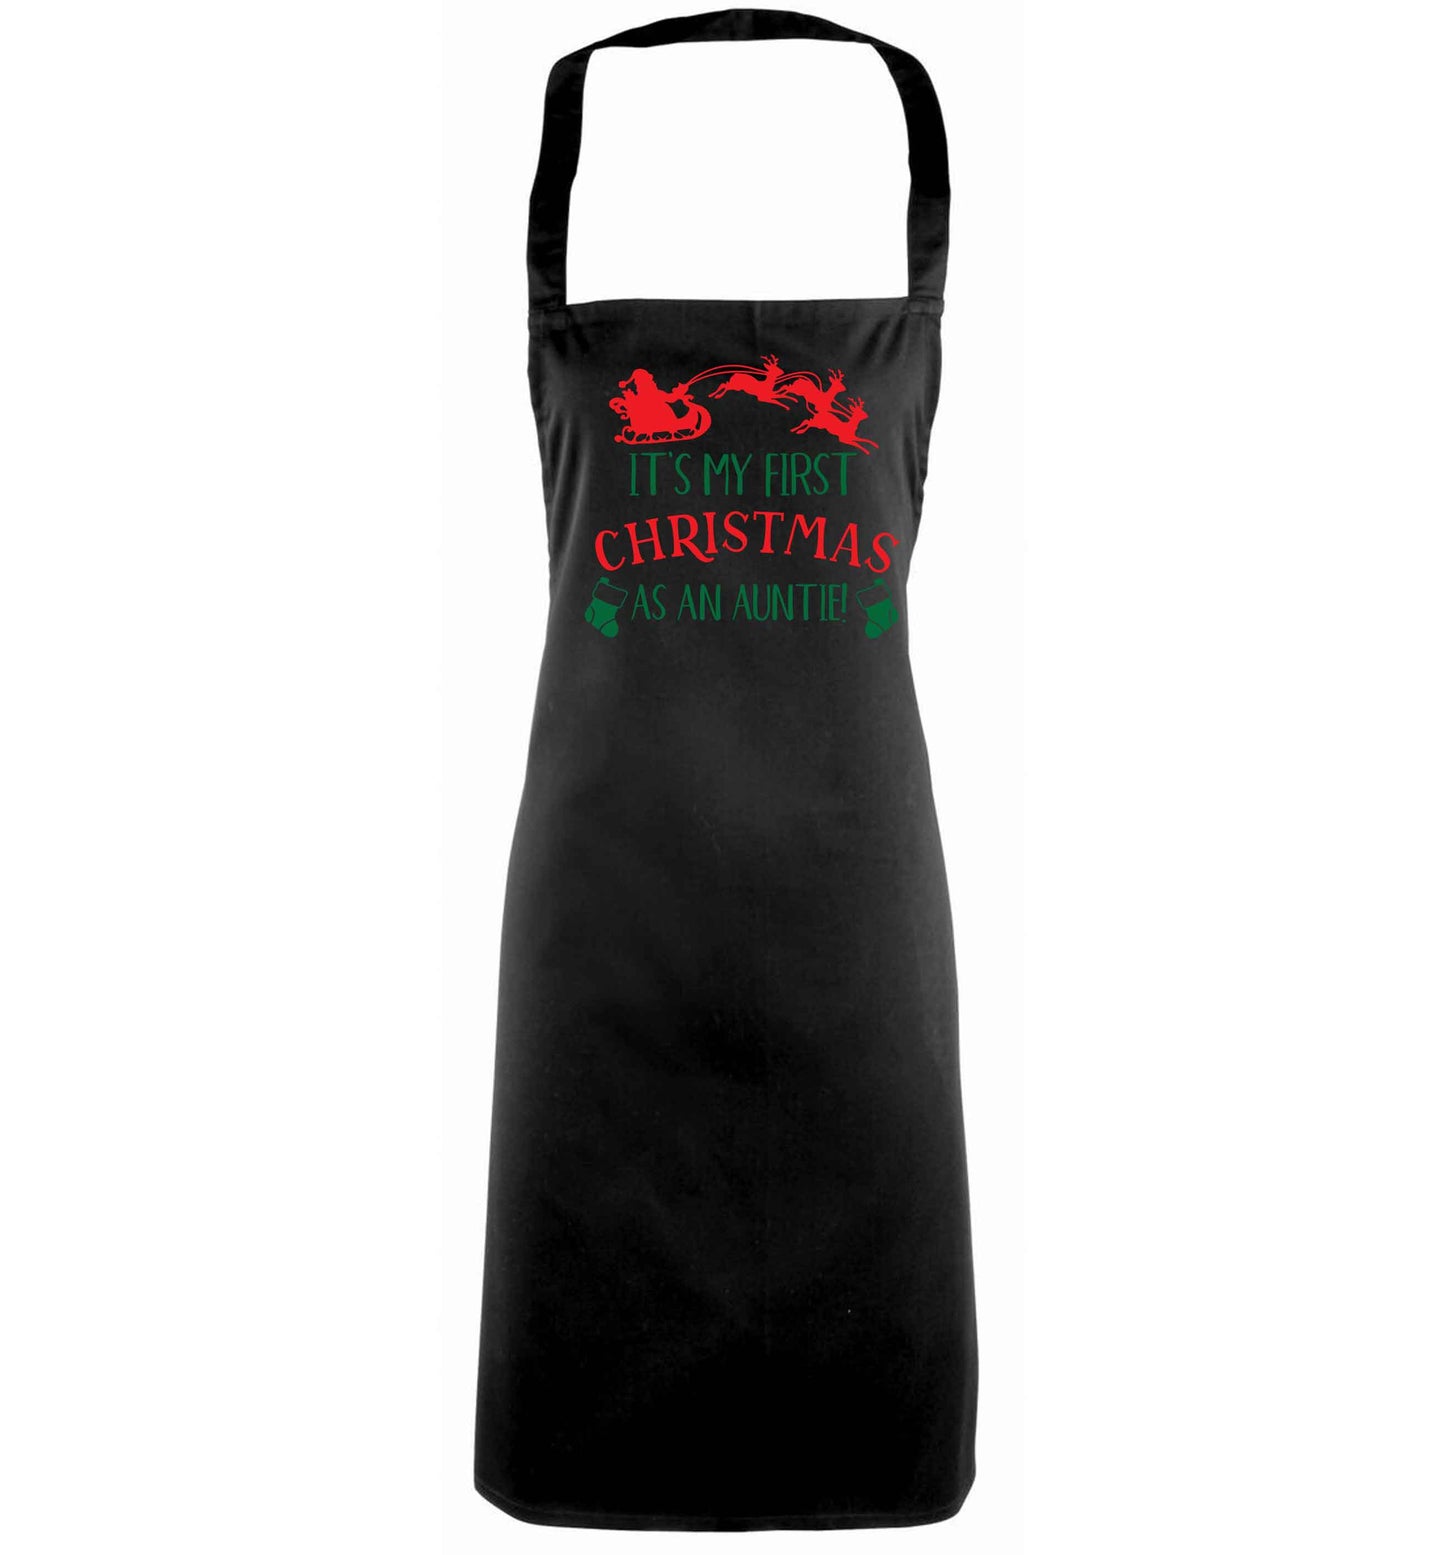 It's my first Christmas as an auntie! black apron